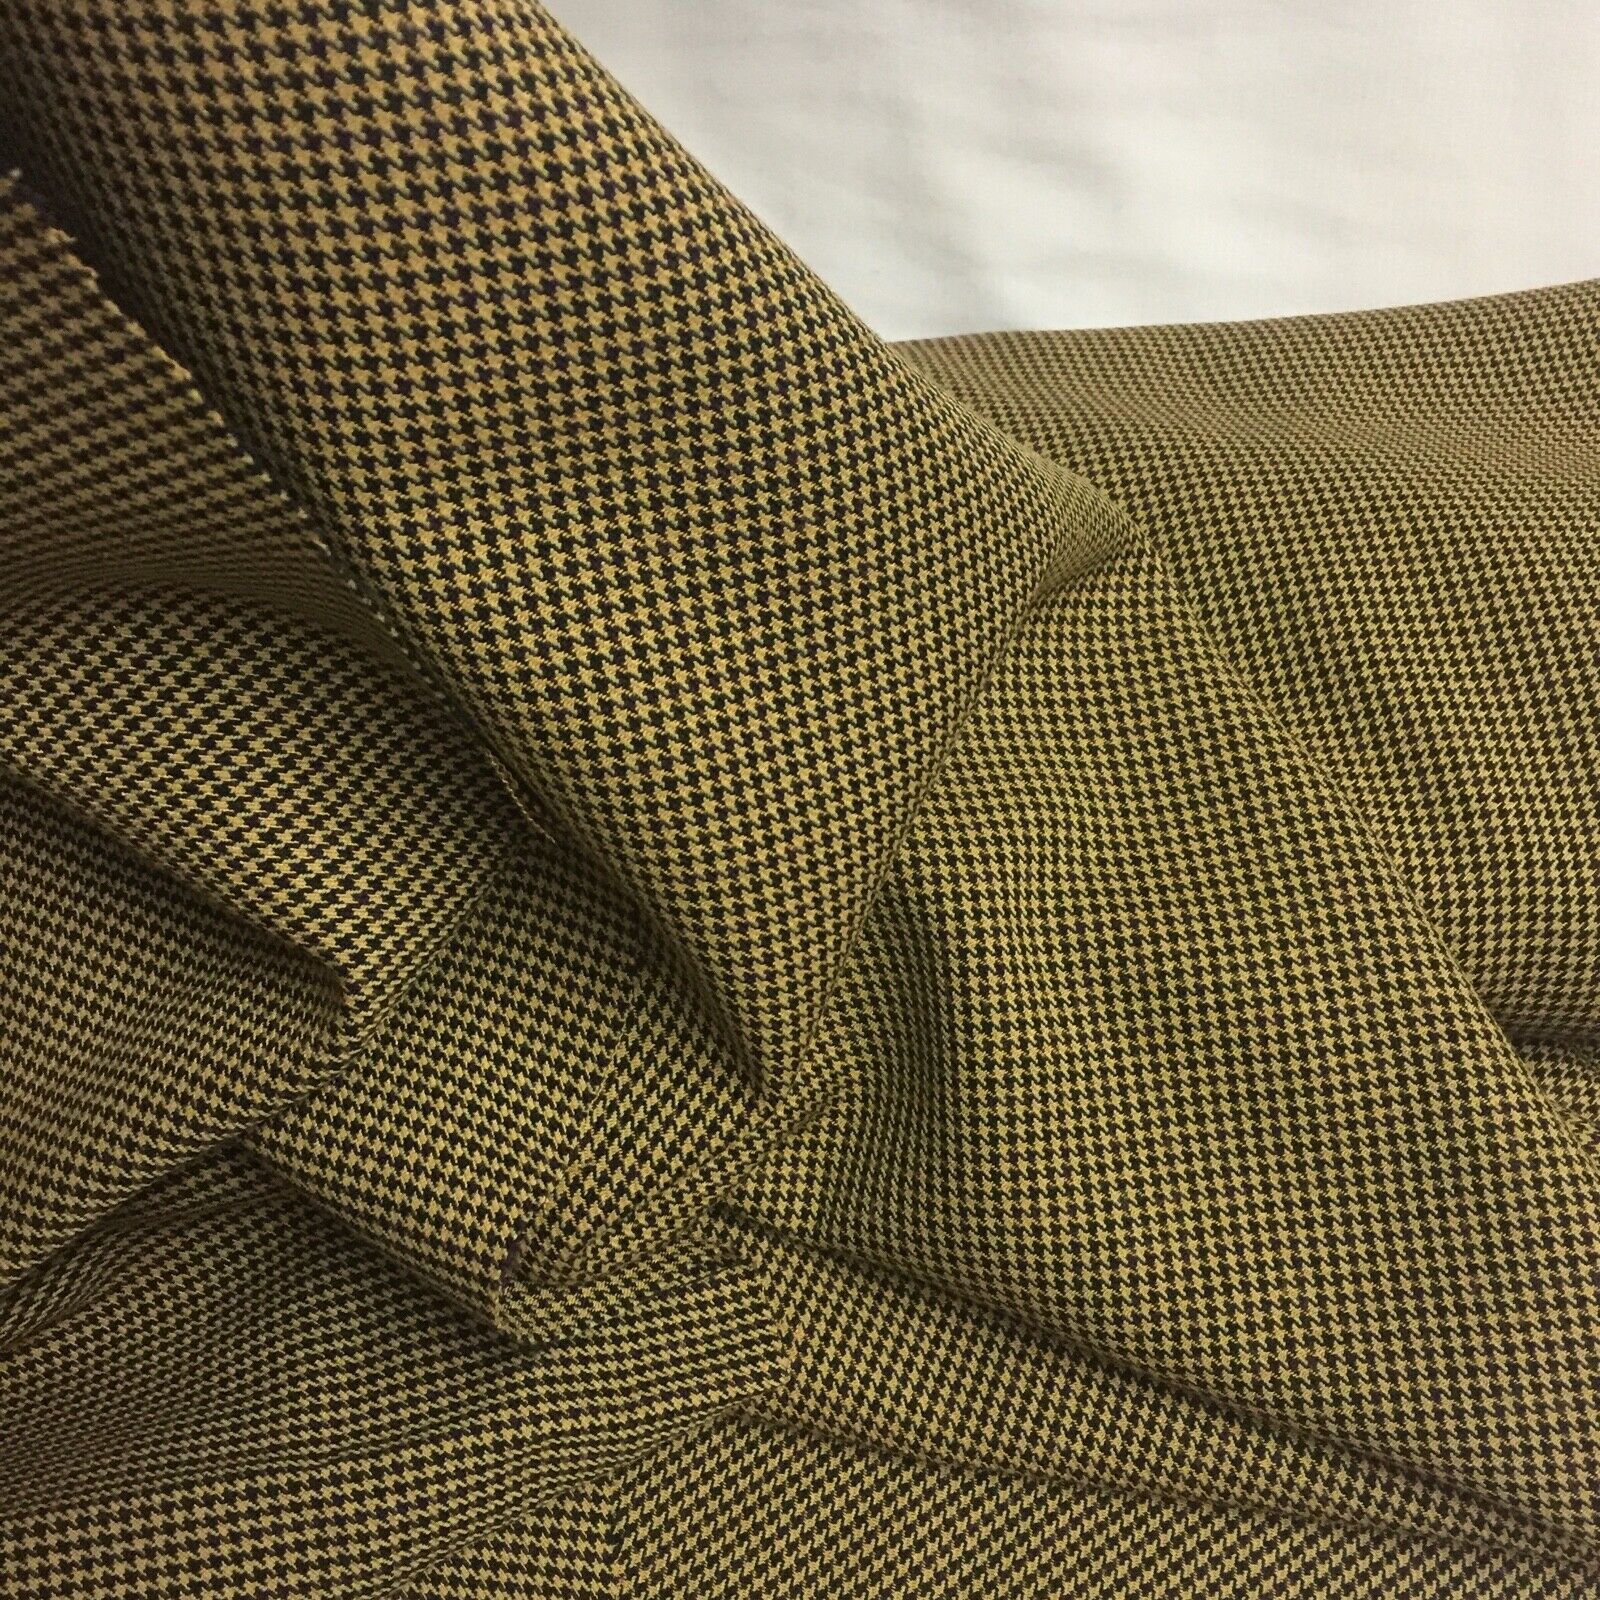 5.5m VINTAGE Brown Yellow Poly Houndstooth Fabric Textile Upholstery 70s Fashion